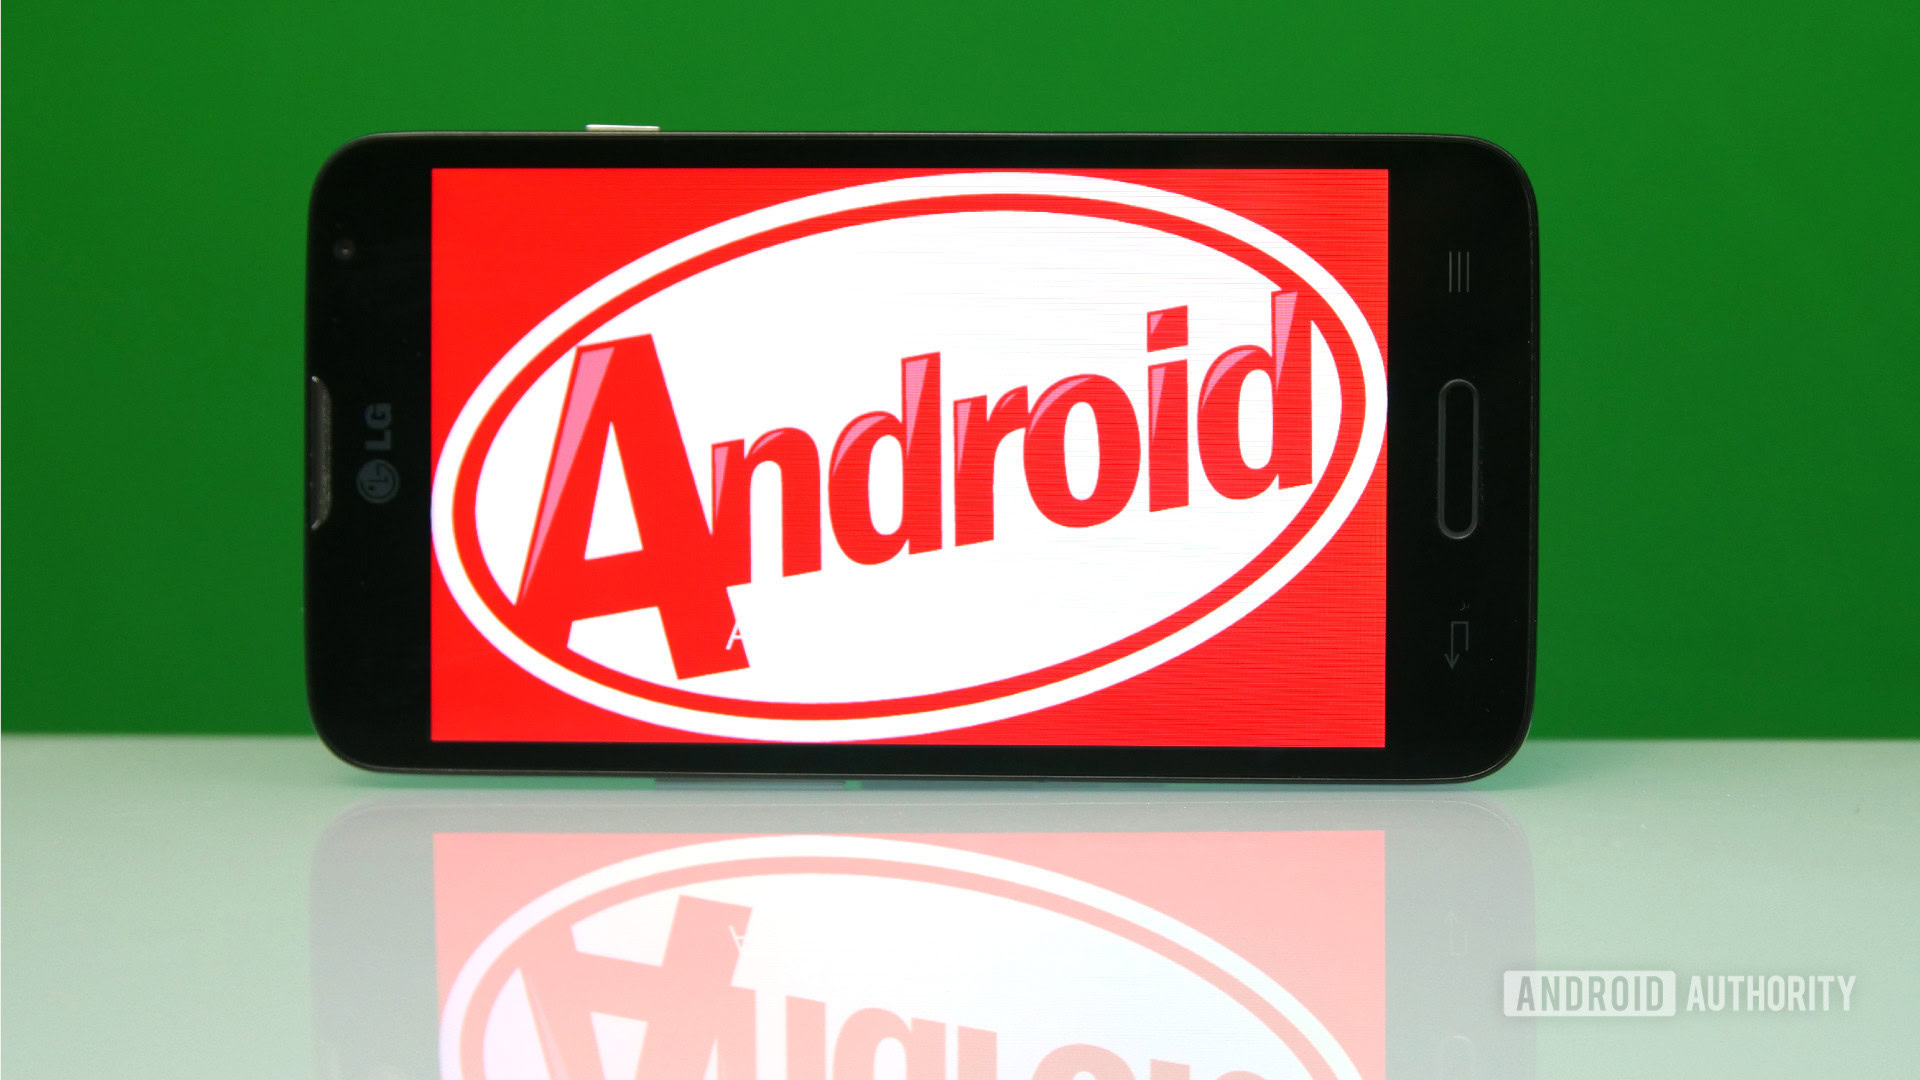 Android KitKat reaches end as Google Play services discontinues 